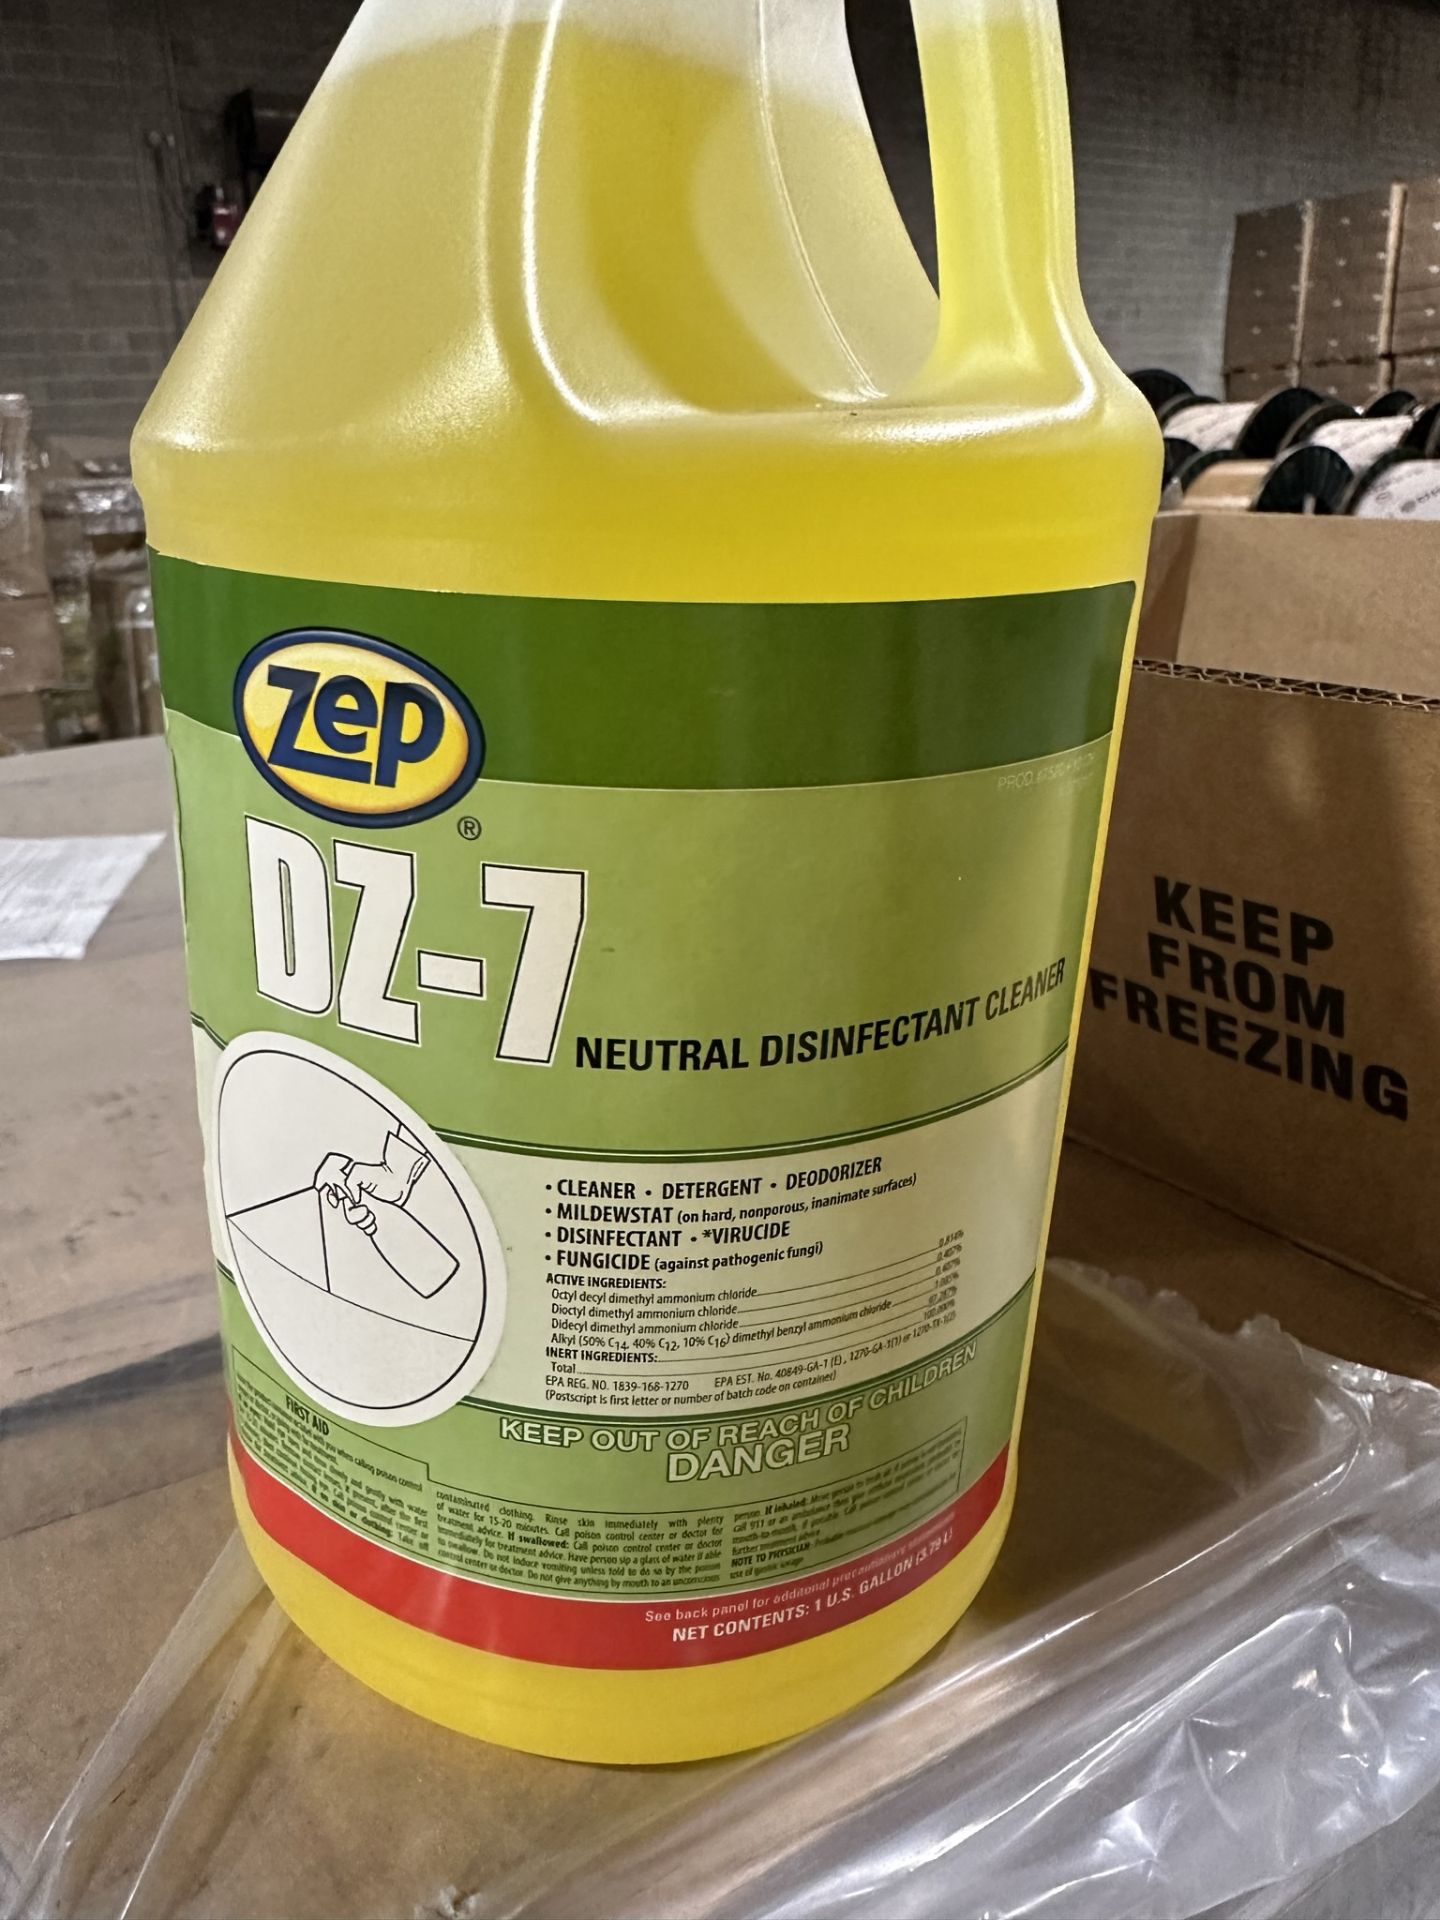 Lot of (55) Cases of Zep DZ-7 Neuteral DIsinfectant Cleaner